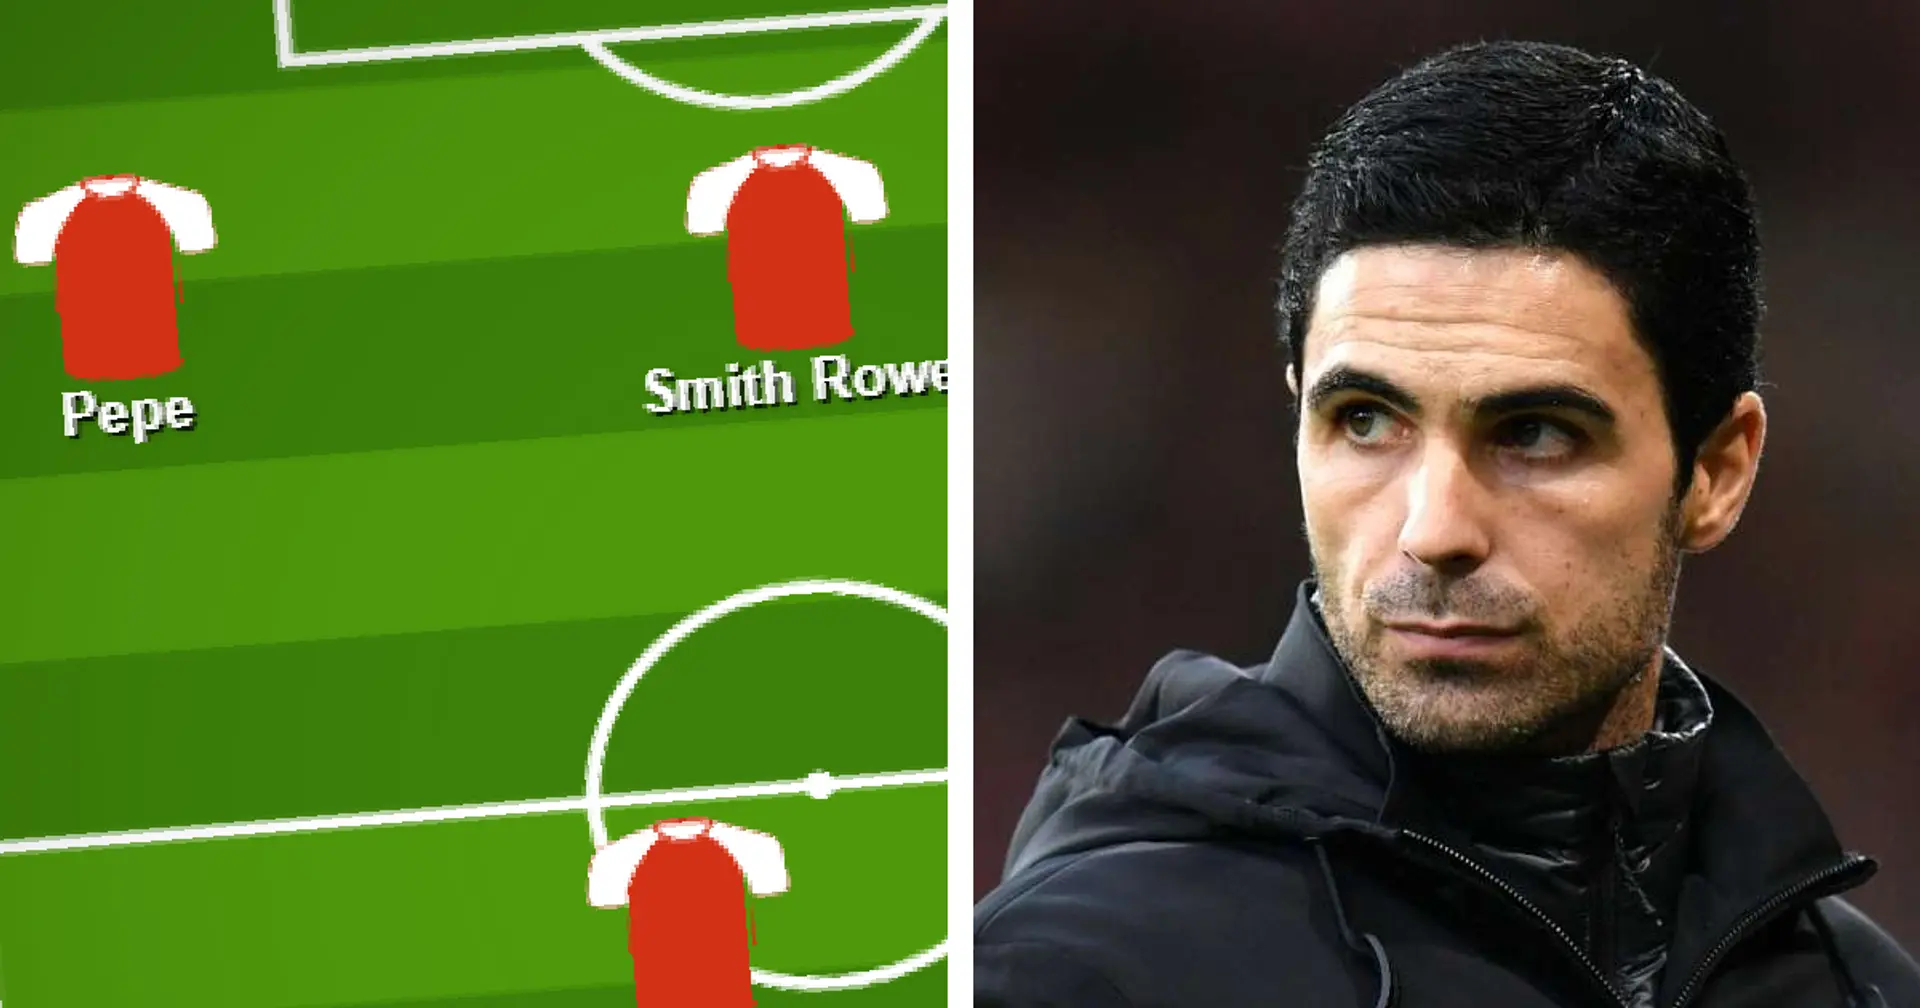 Arsenal vs Everton: Team news, probable line-ups, score predictions and more - preview